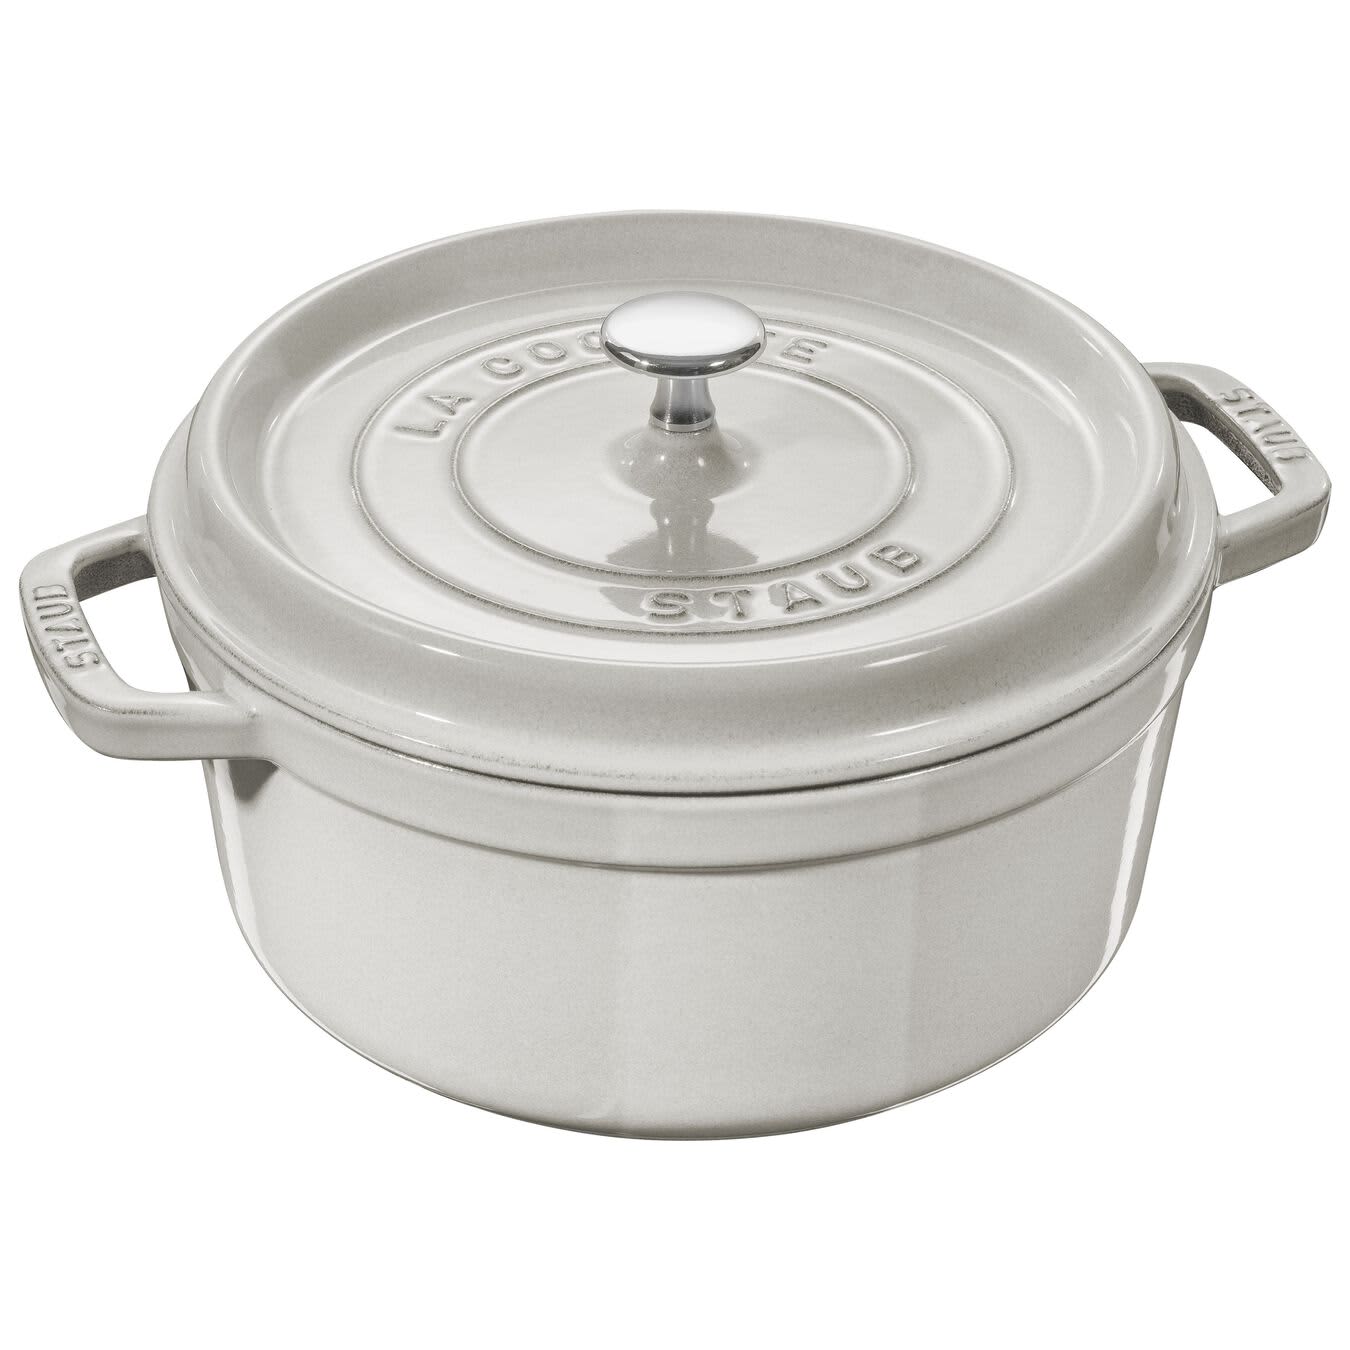 The Best Size and Shape Dutch Oven to Get